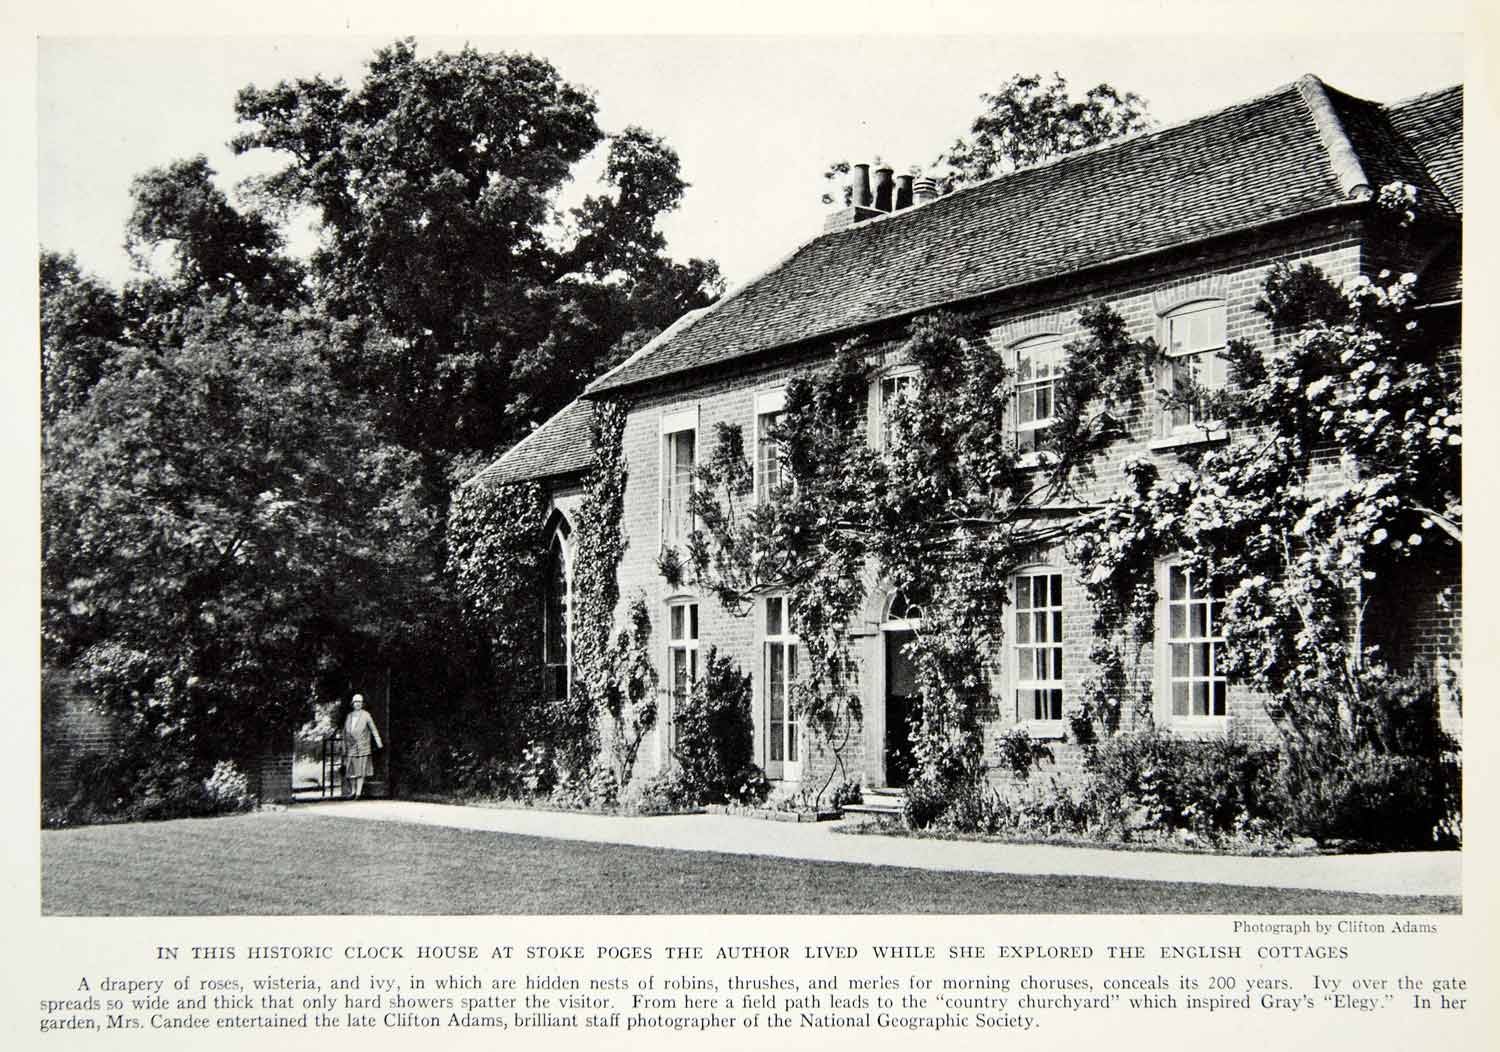 1935 Print Stoke Poges Home Architecture England Historical Image View NGMA6